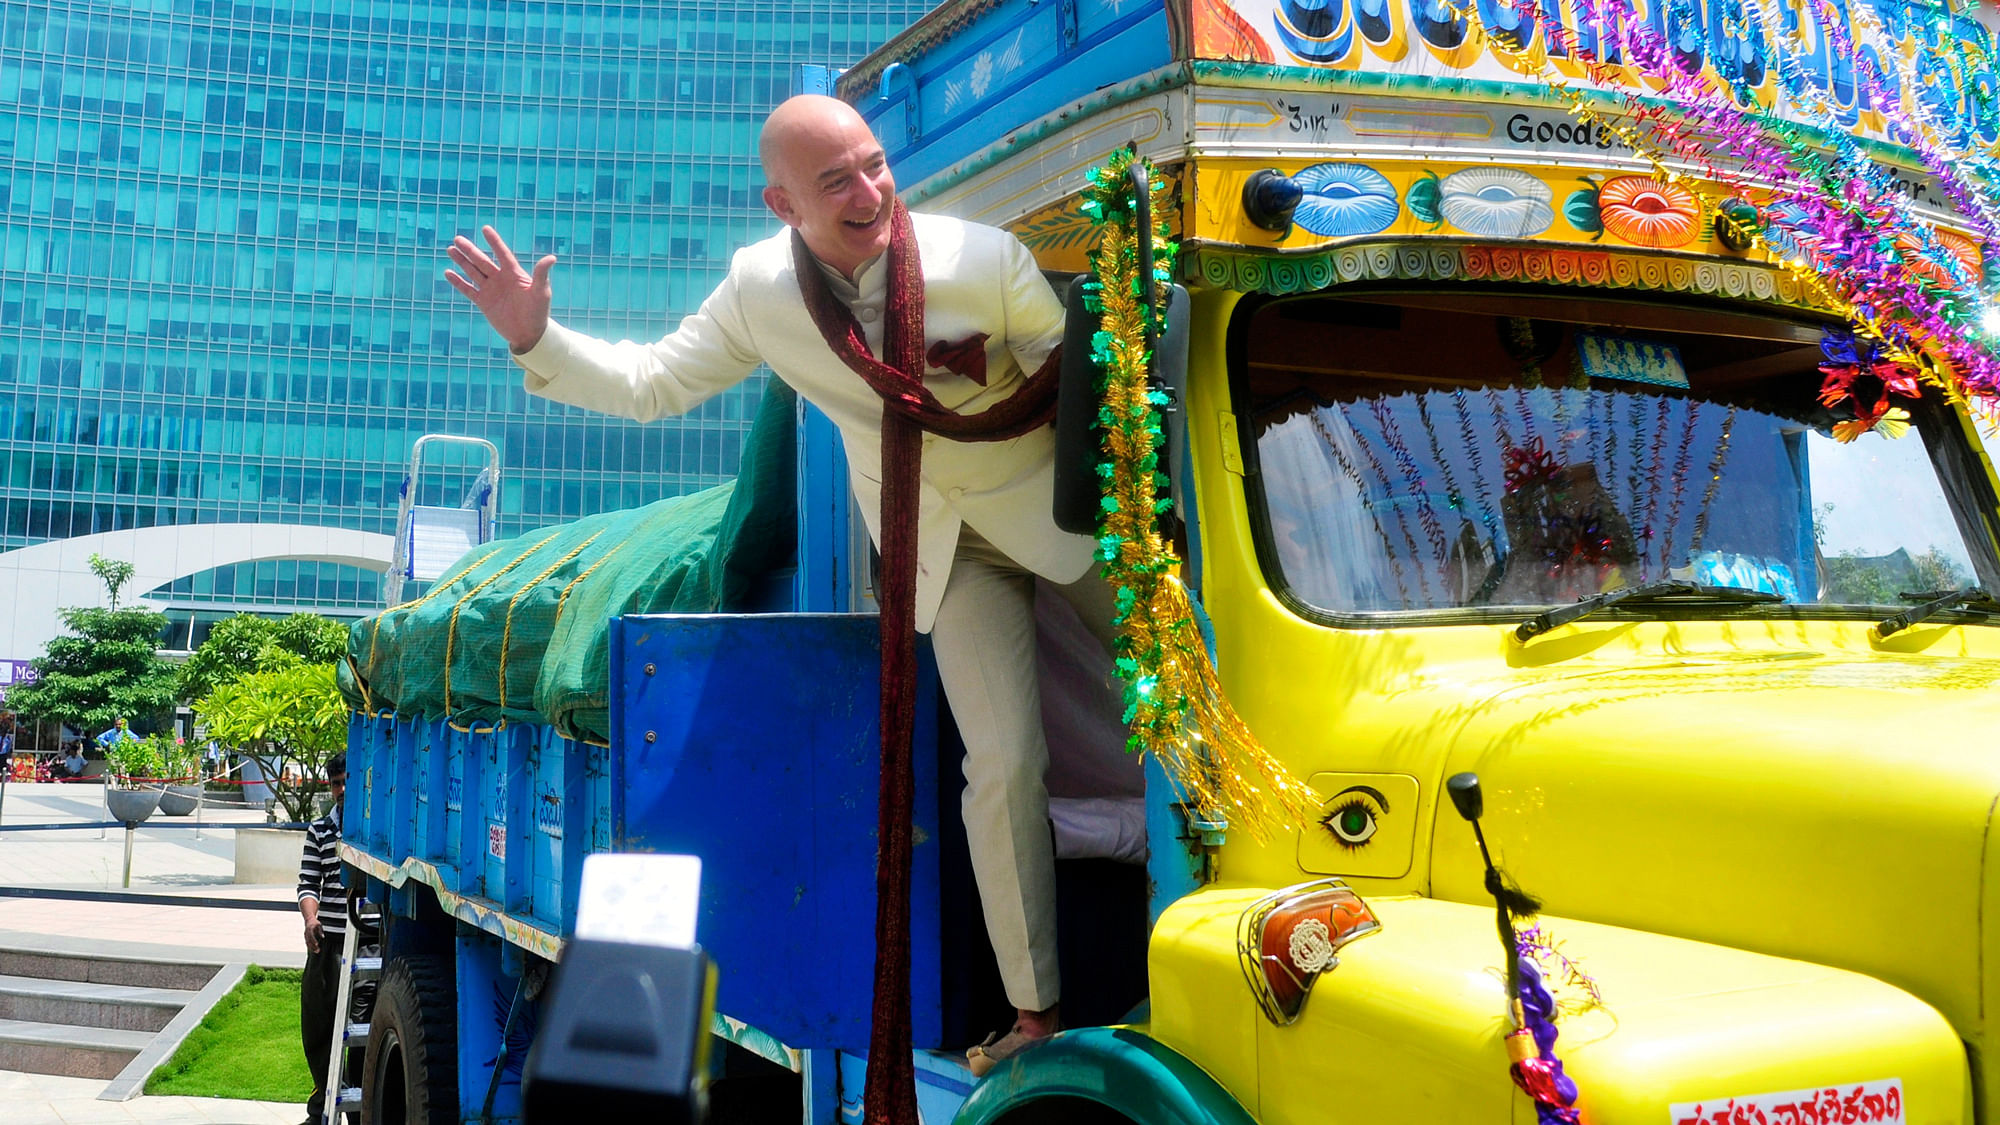 Jeff Bezos, founder and CEO of Amazon, poses as he stands on a supply truck at the premises of a shopping mall in Bangalore in 2014.